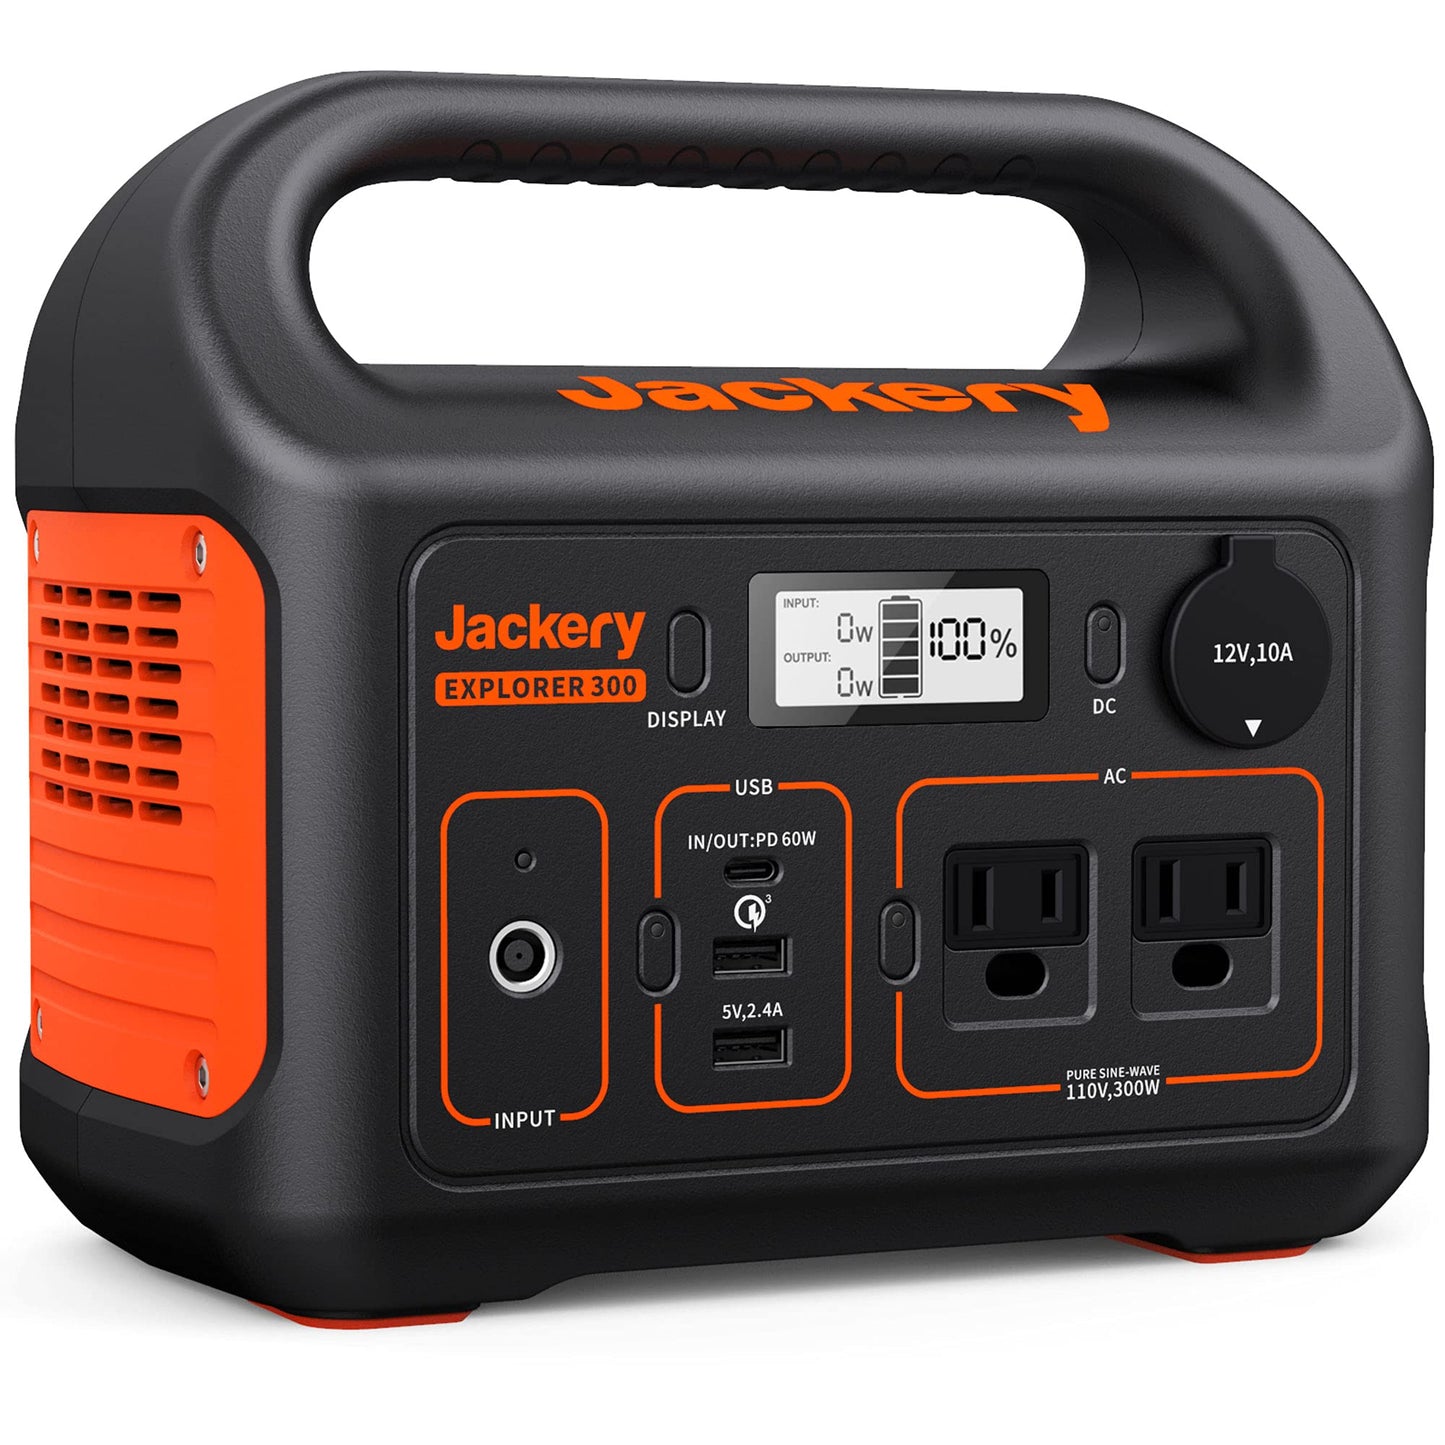 Jackery Portable Power Station Explorer 300, 293Wh Backup Lithium Battery, 110V/300W Pure Sine Wave AC Outlet, Solar Generator (Solar Panel Not Included) for Outdoors Camping Travel Hunting Blackout Portable Power Station 300